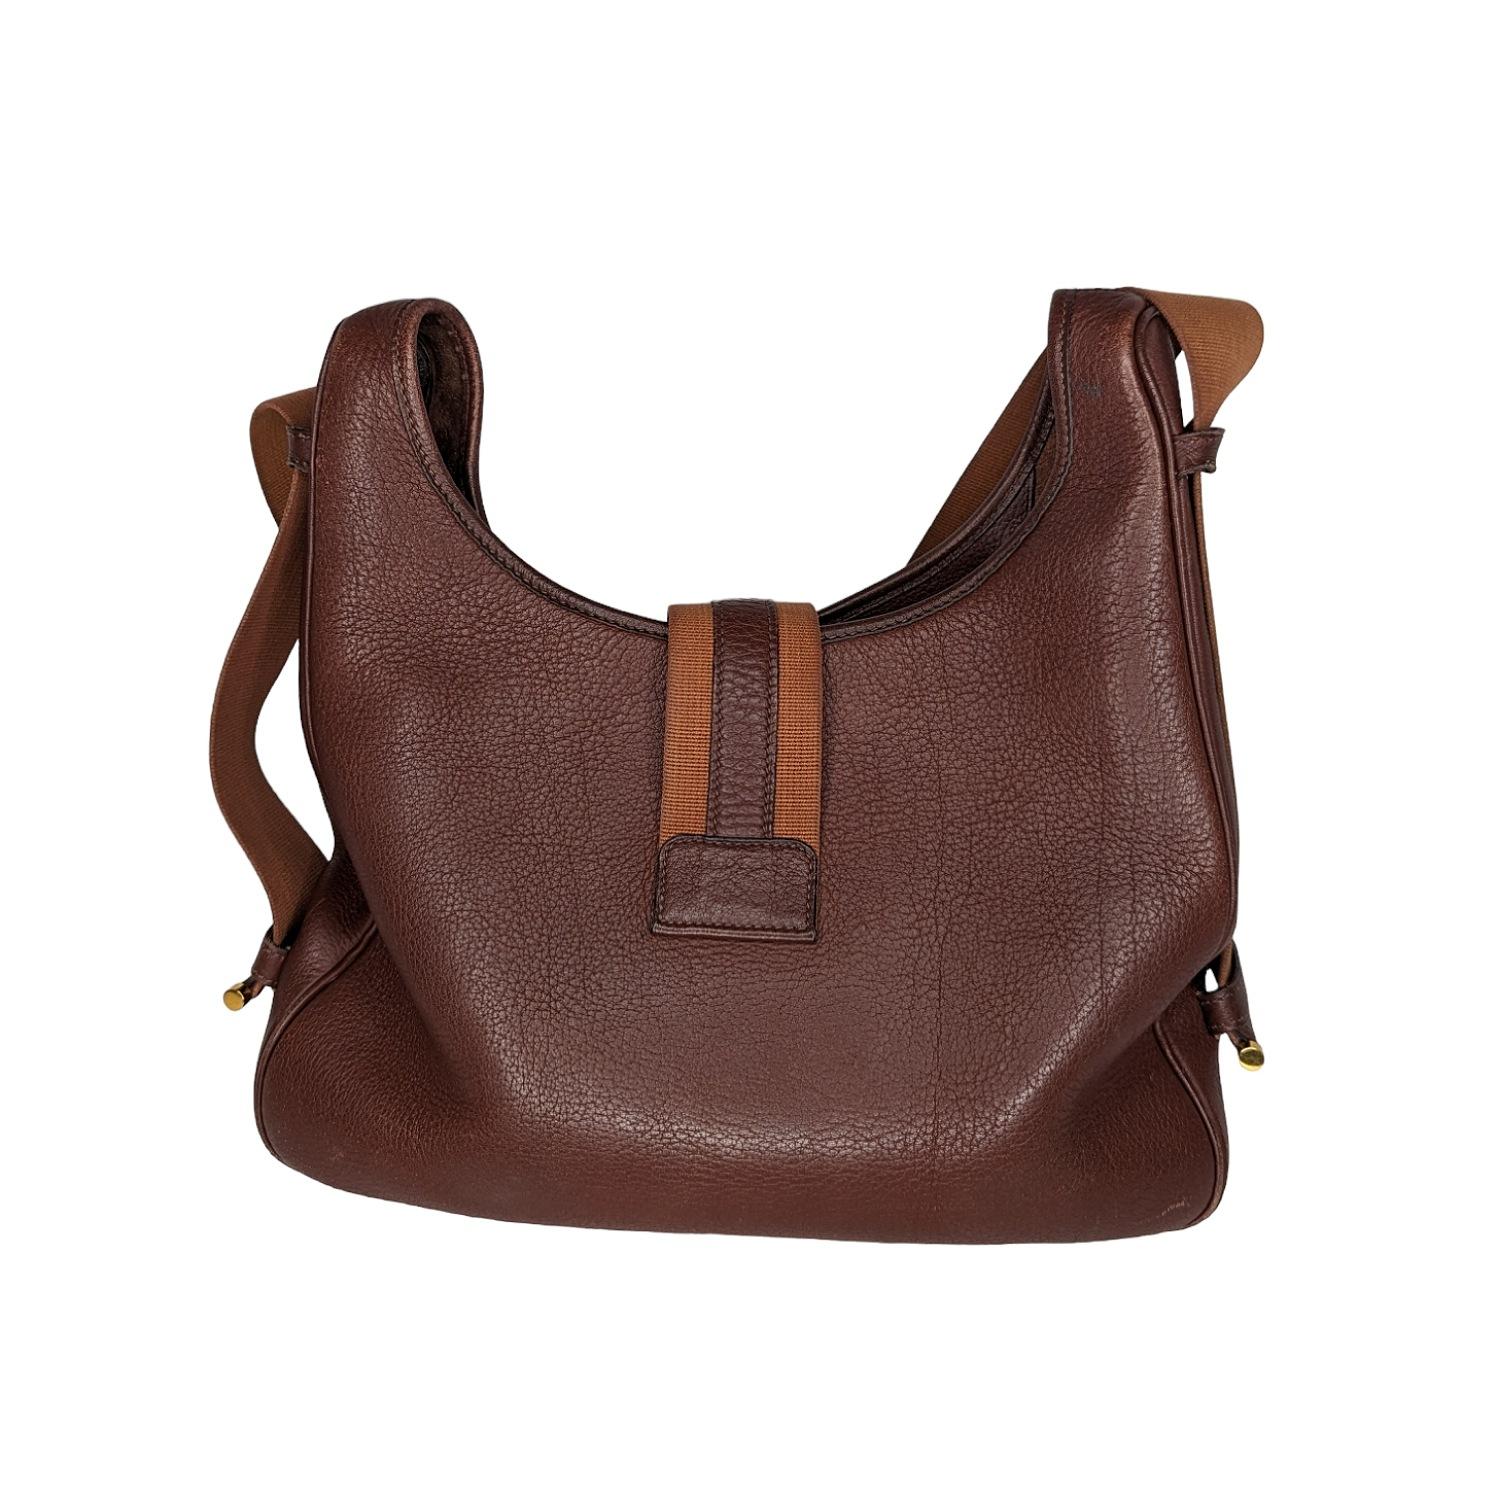 This stylish shoulder bag is beautifully crafted of brown leather. The bag features a looping canvas shoulder strap with polished gold hardware and a crossover strap with a gold latch. This opens to a spacious interior. This is a marvelous shoulder